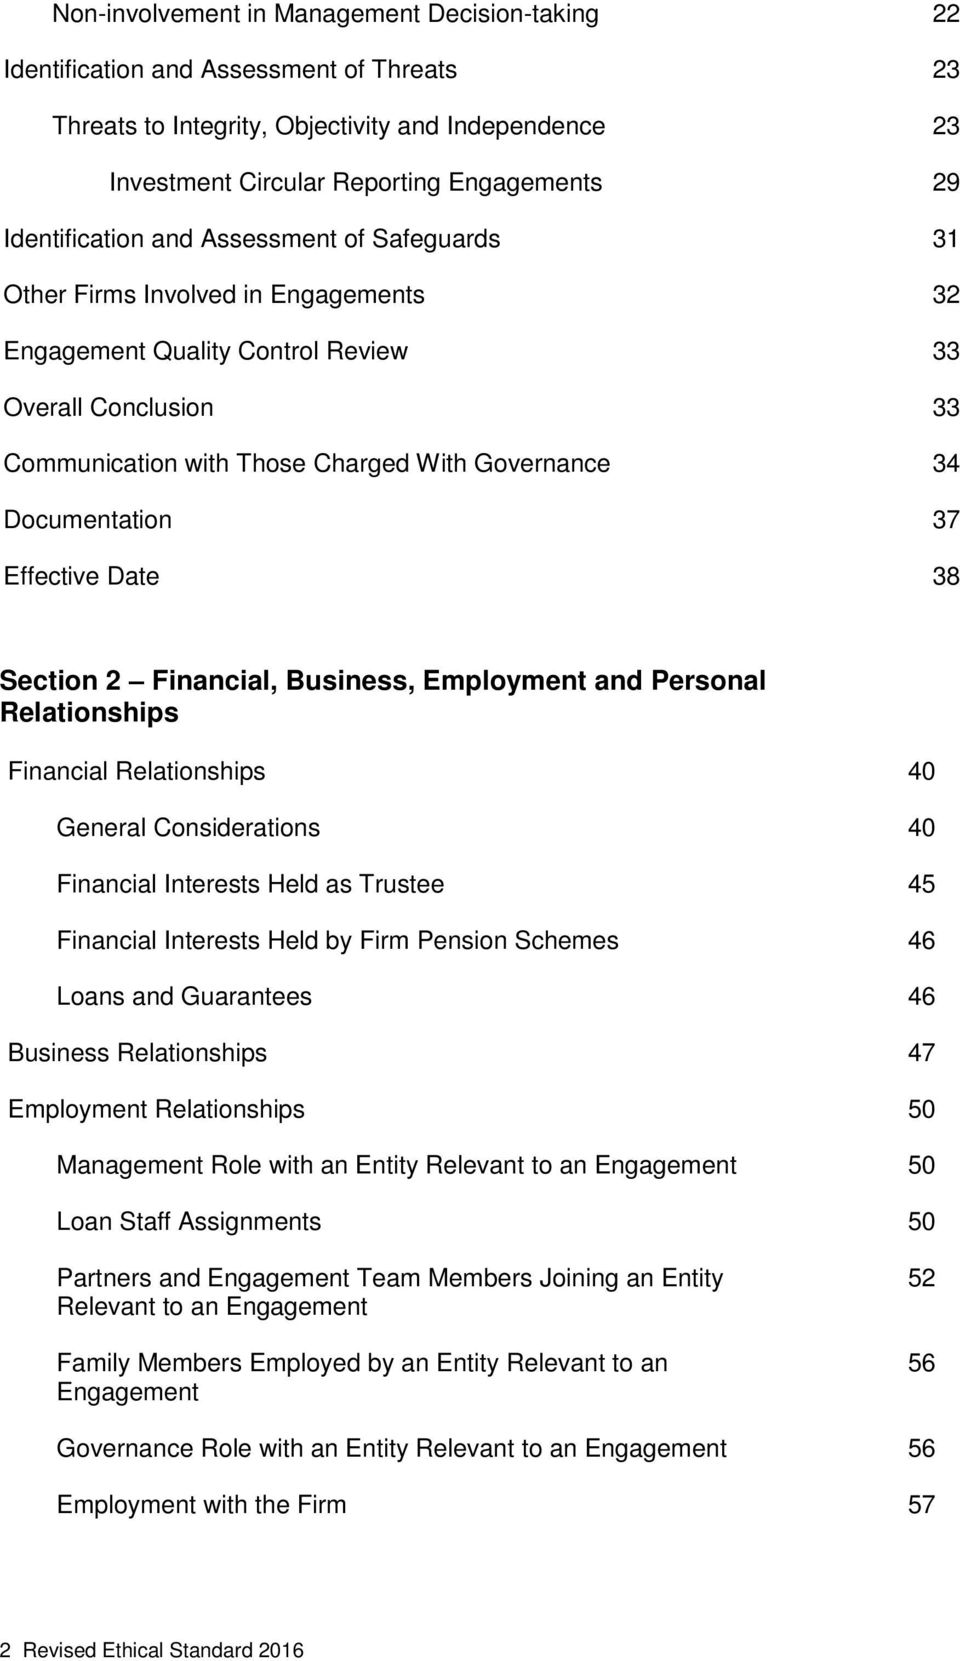 Documentation 37 Effective Date 38 Section 2 Financial, Business, Employment and Personal Relationships Financial Relationships 40 General Considerations 40 Financial Interests Held as Trustee 45